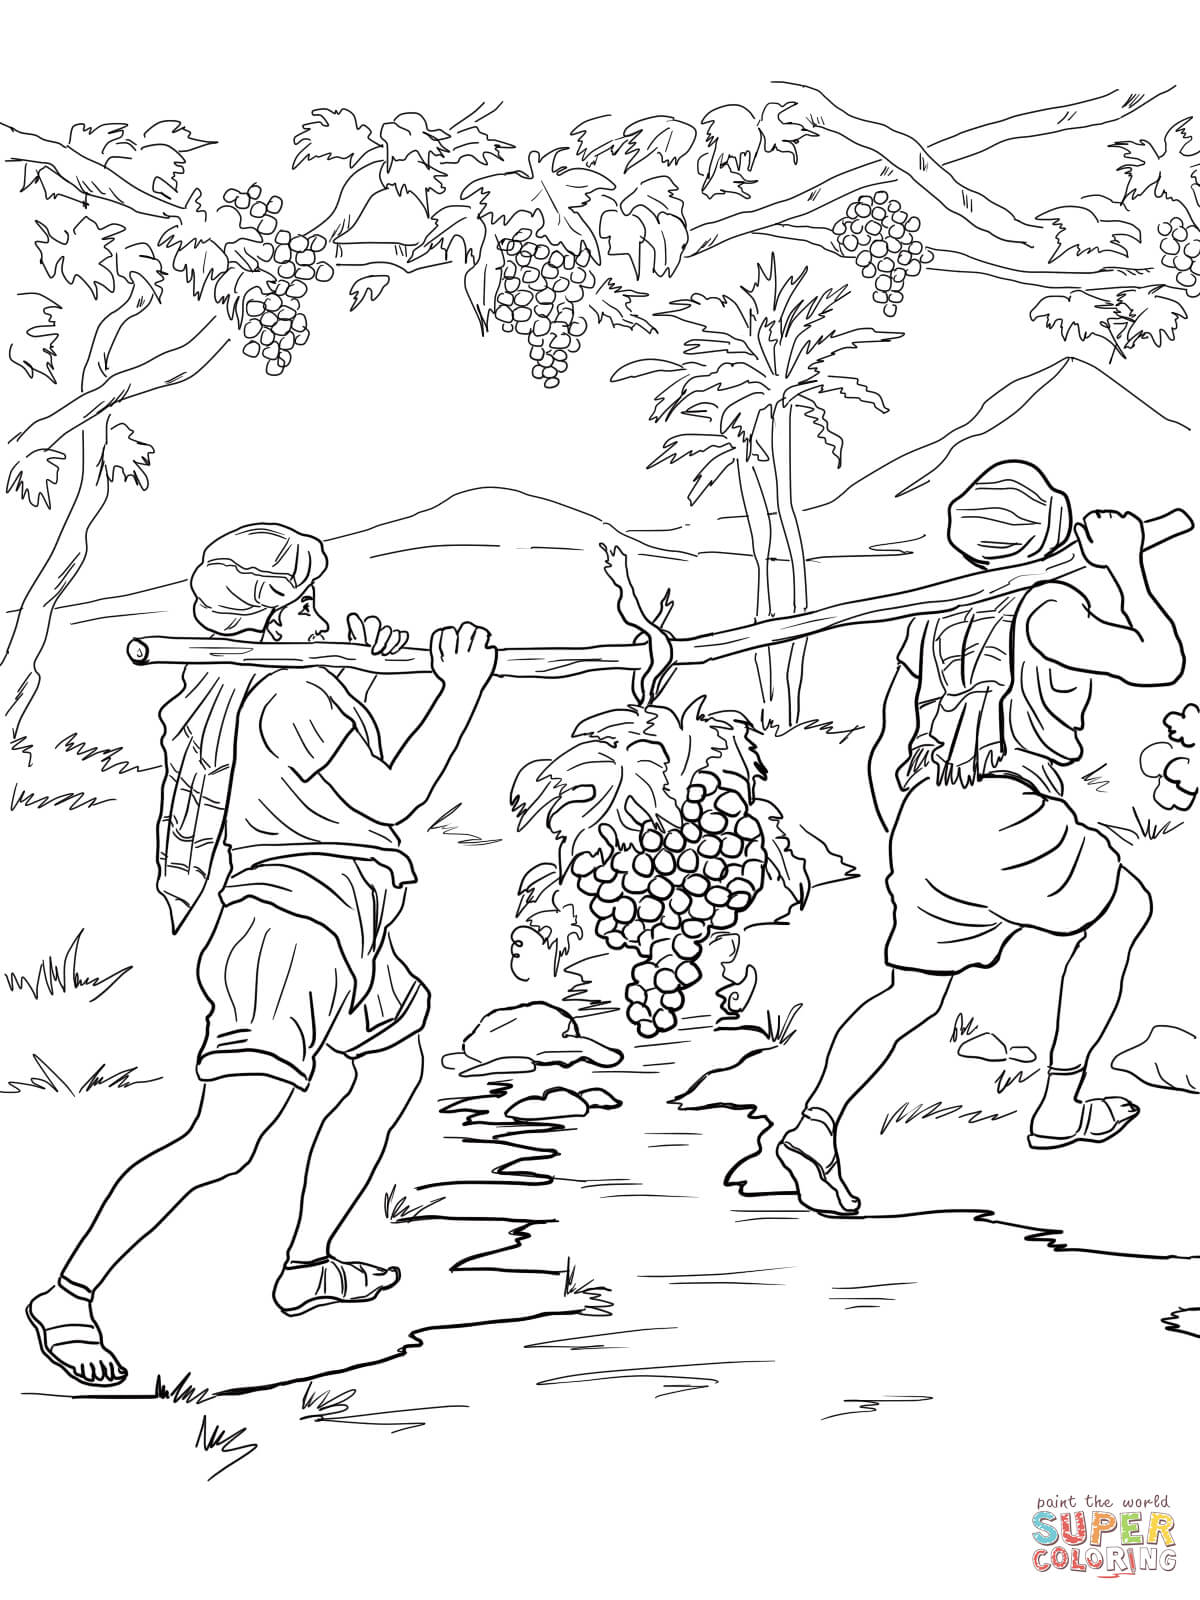 Joshua and the Fall of Jericho coloring page | Free Printable ...